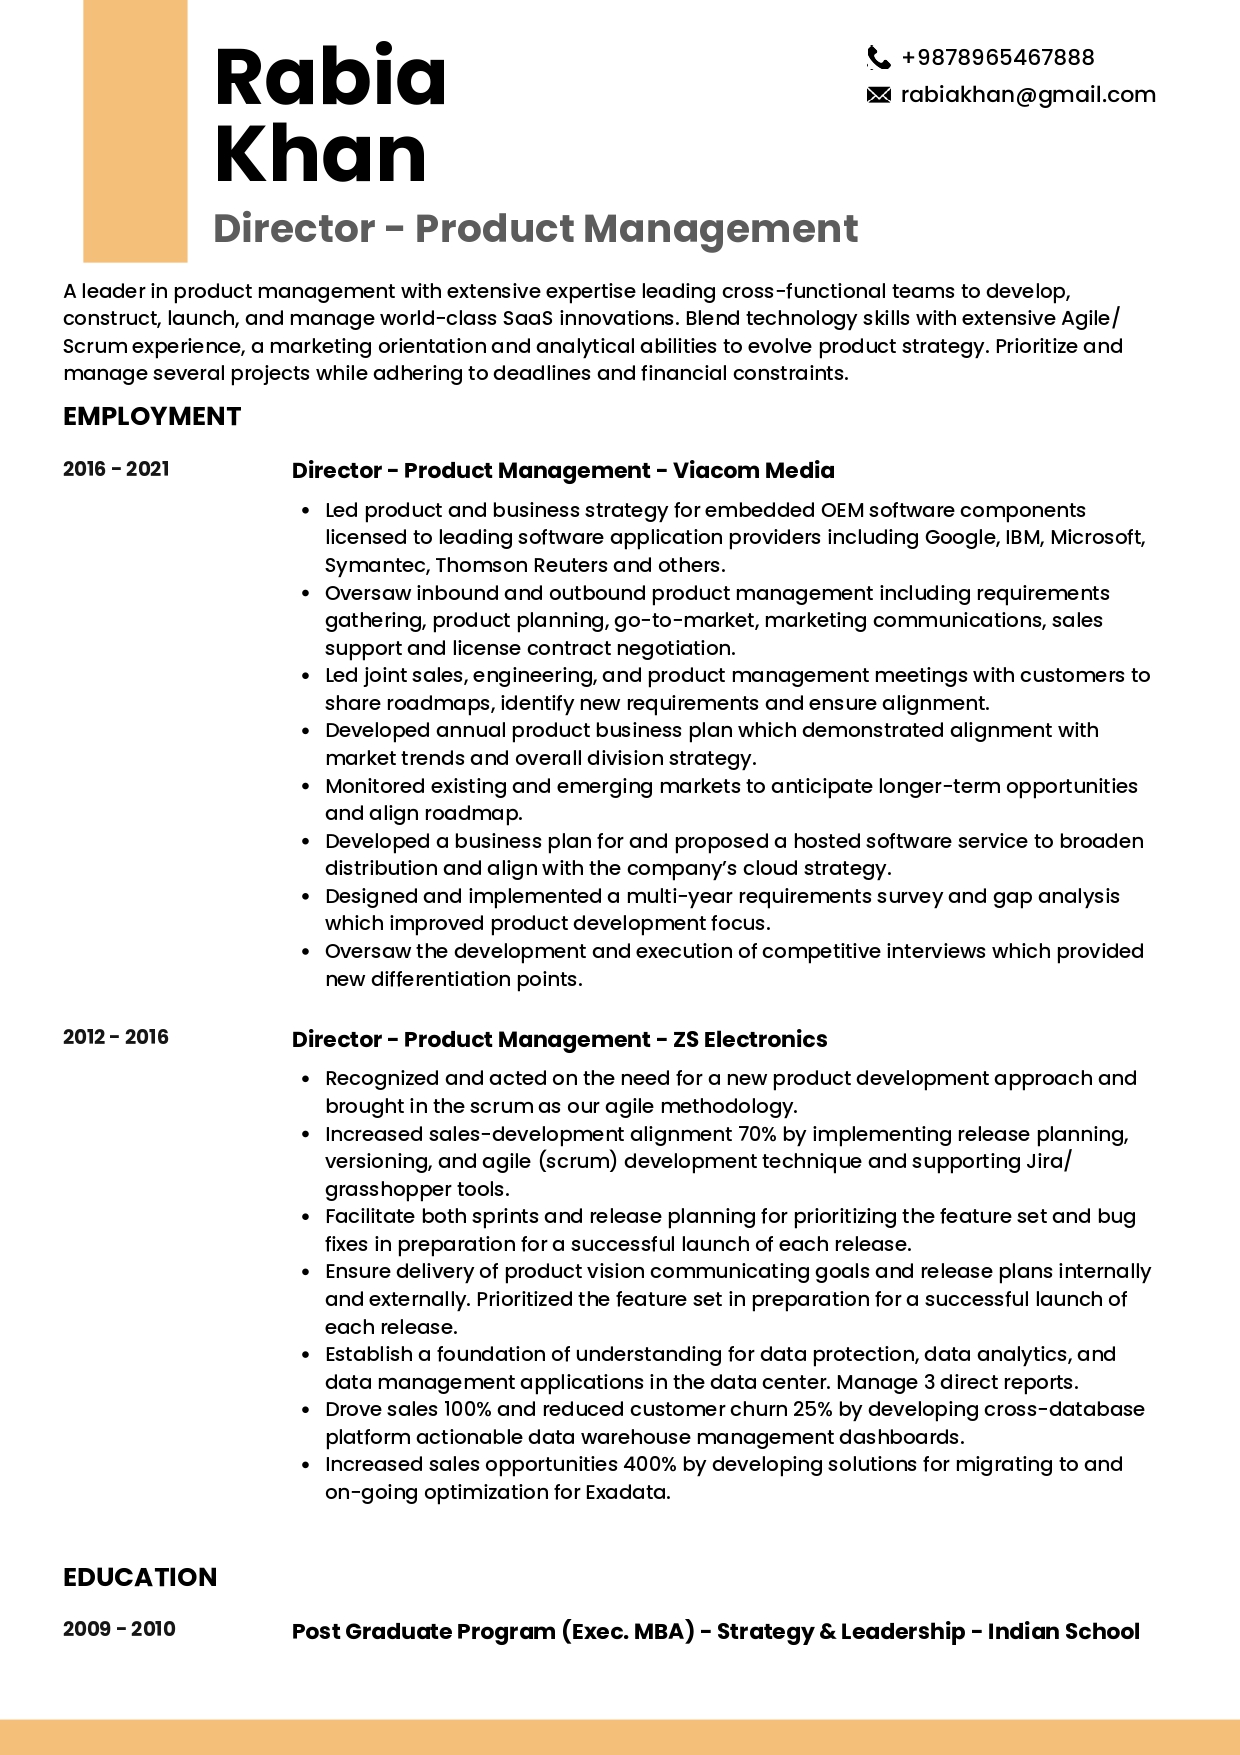 Resume of Director of Product Management